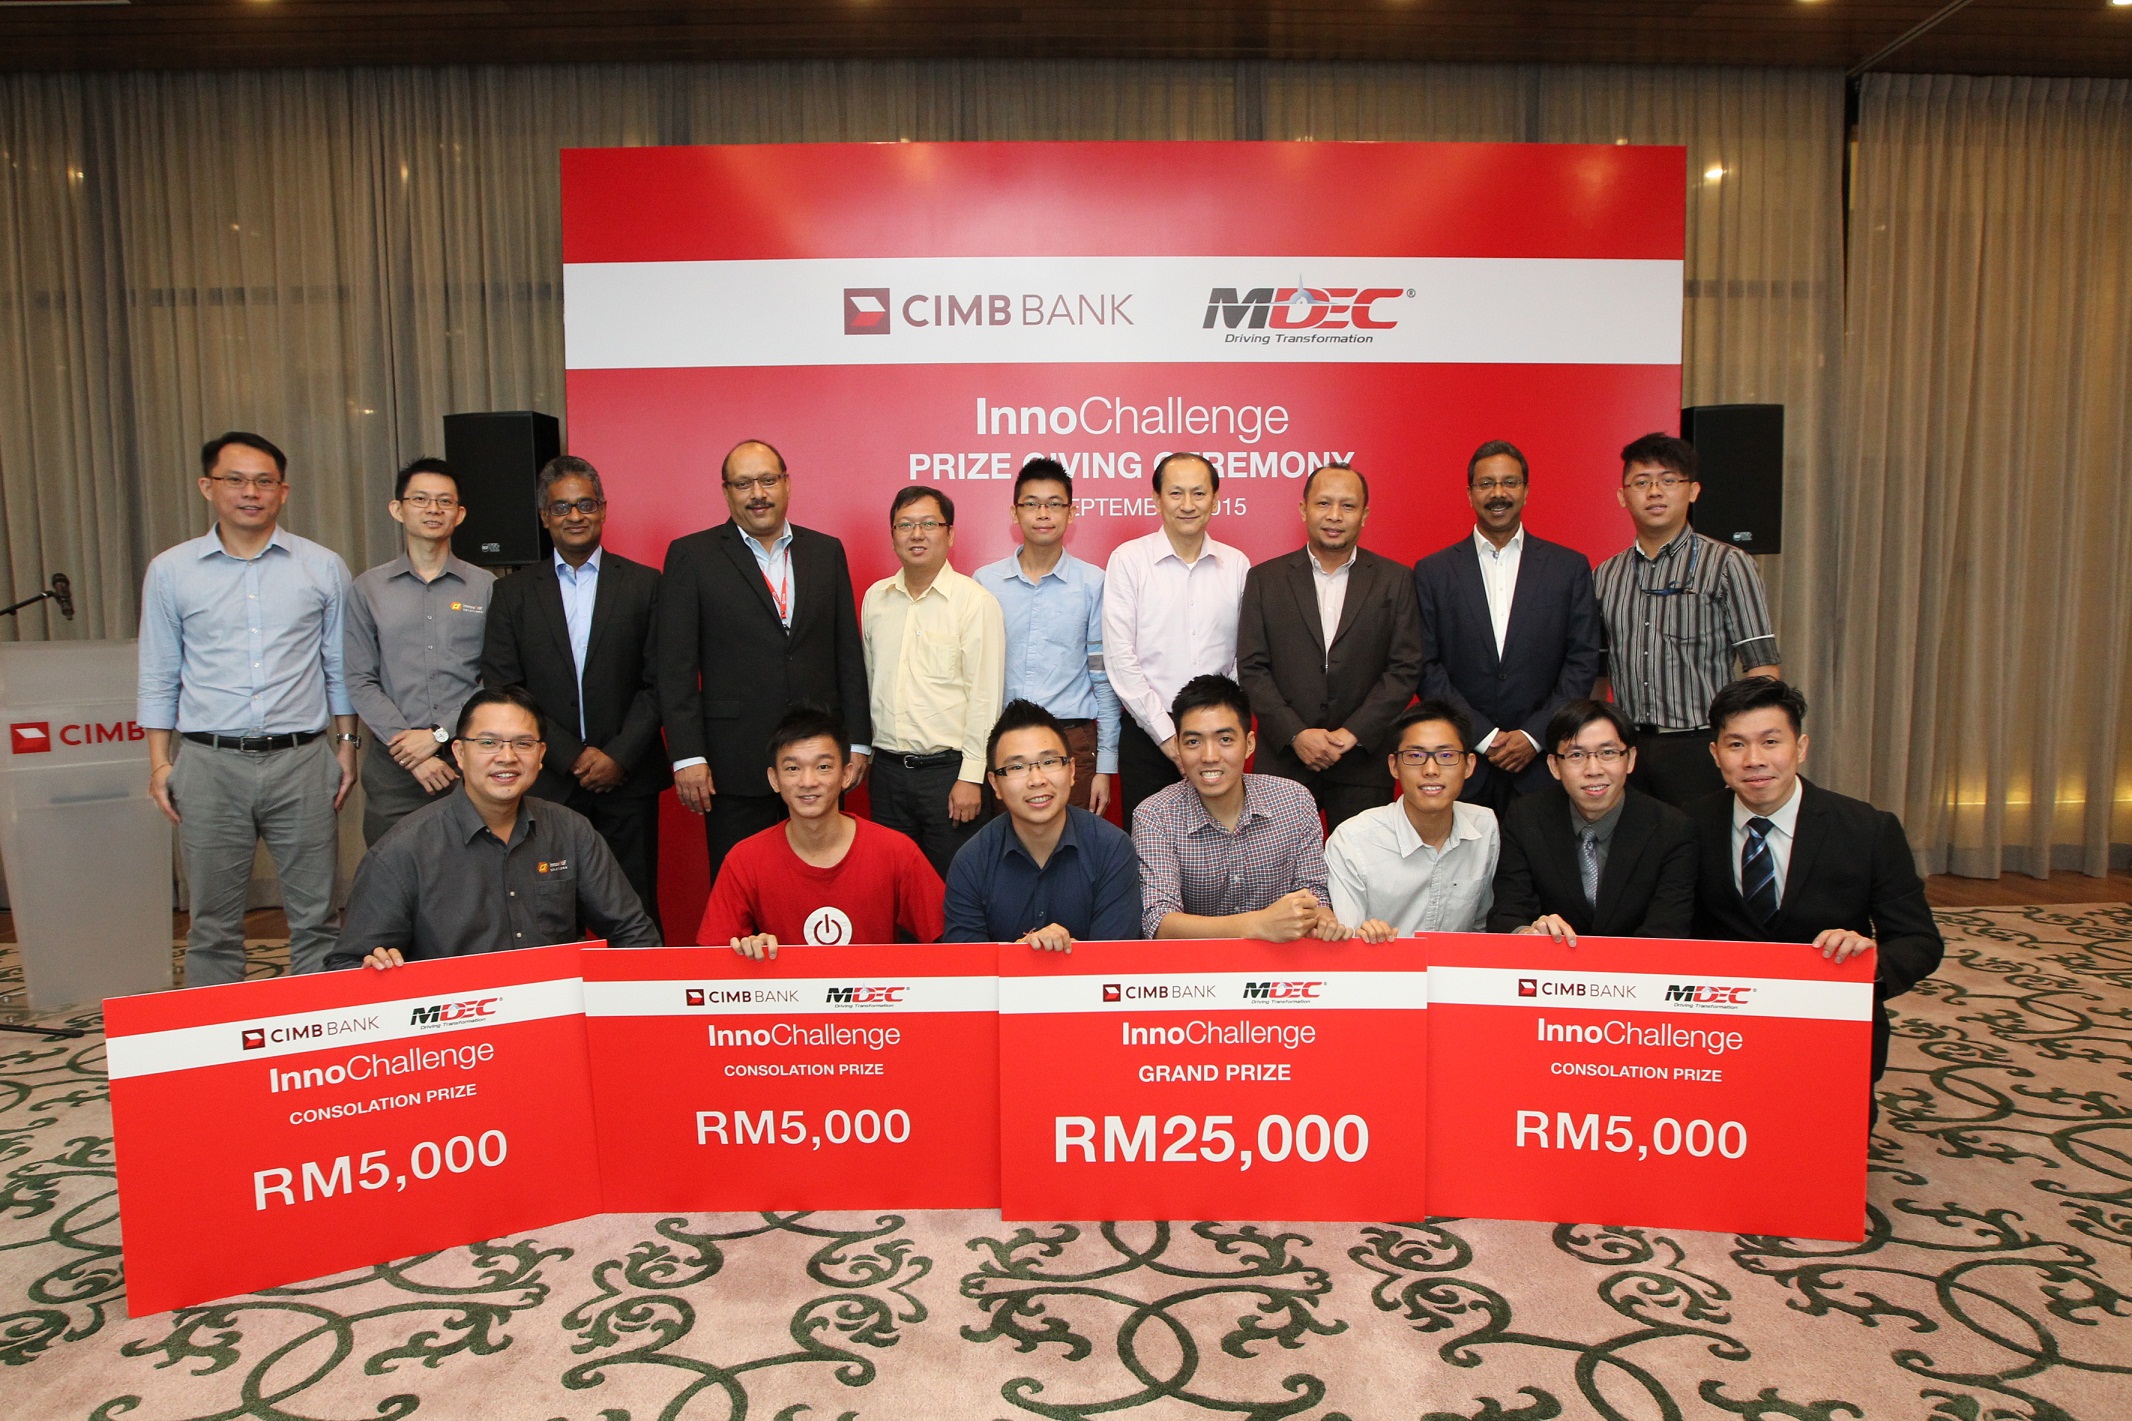 CIMB Data Science Challenge 2016 – Up to RM 30,000 Cash Prize!